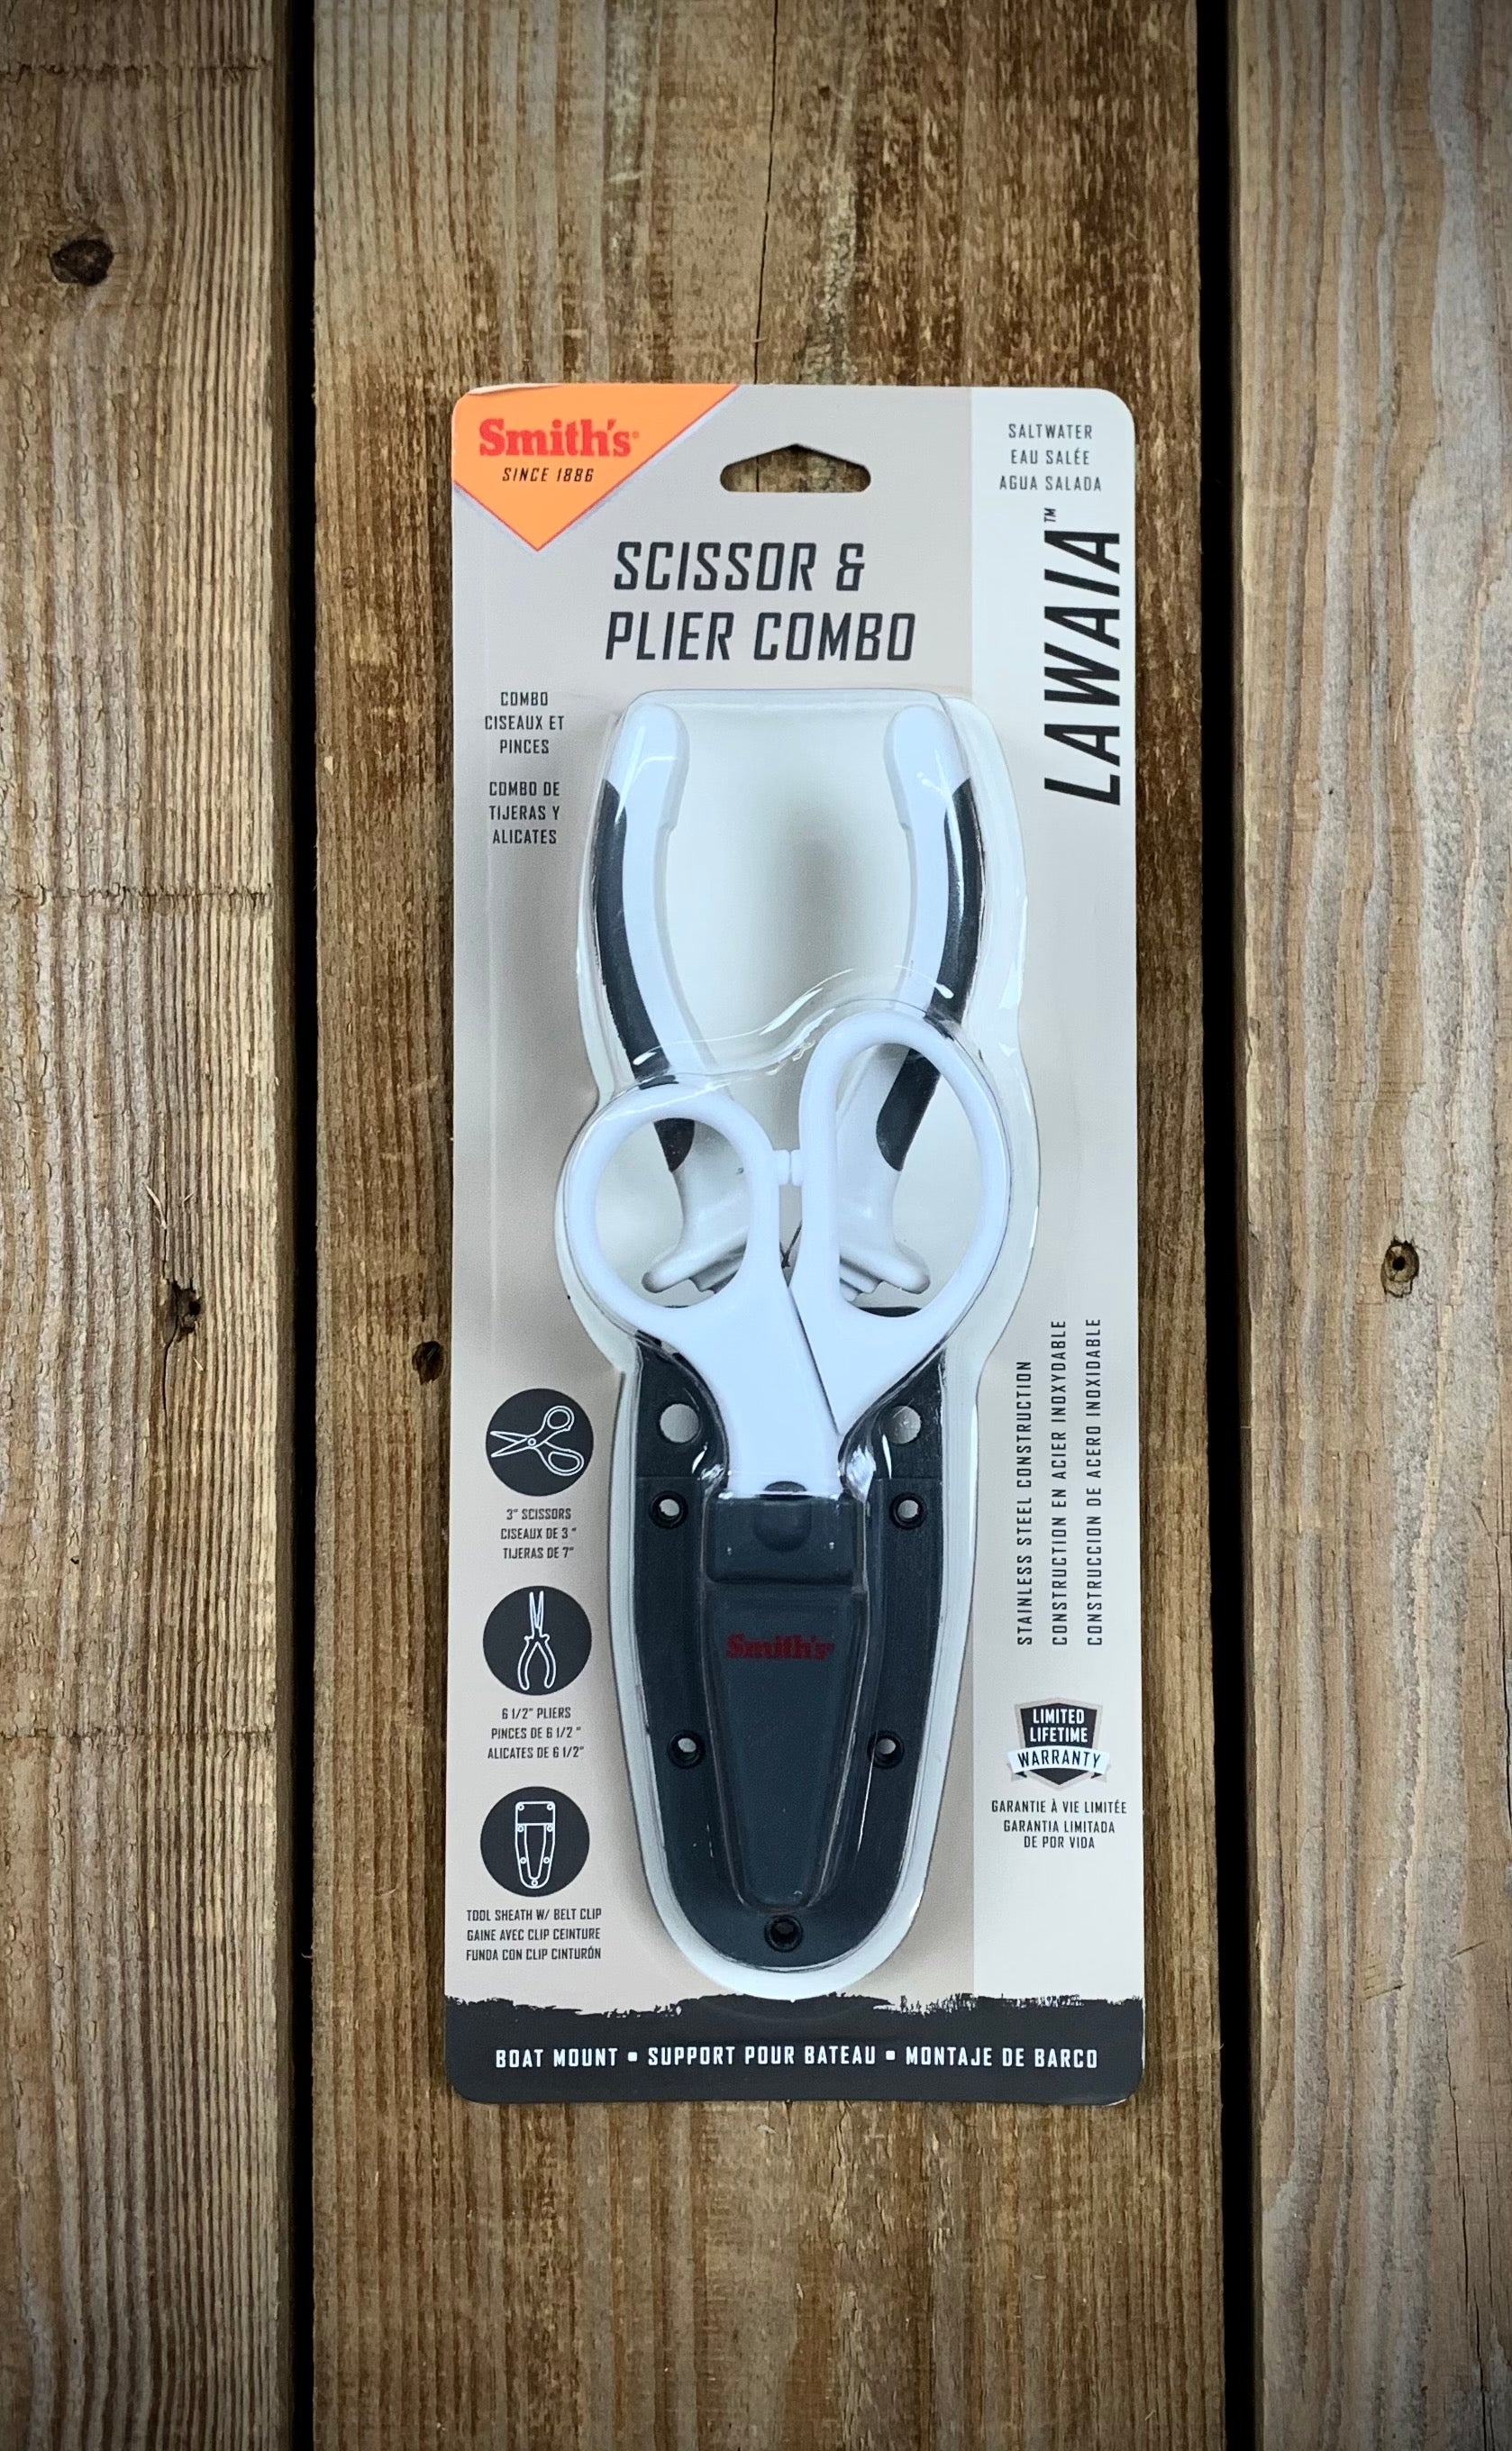 OFFER! FRICHY PLIERS AND SCISSOR # FISHING TOOLS